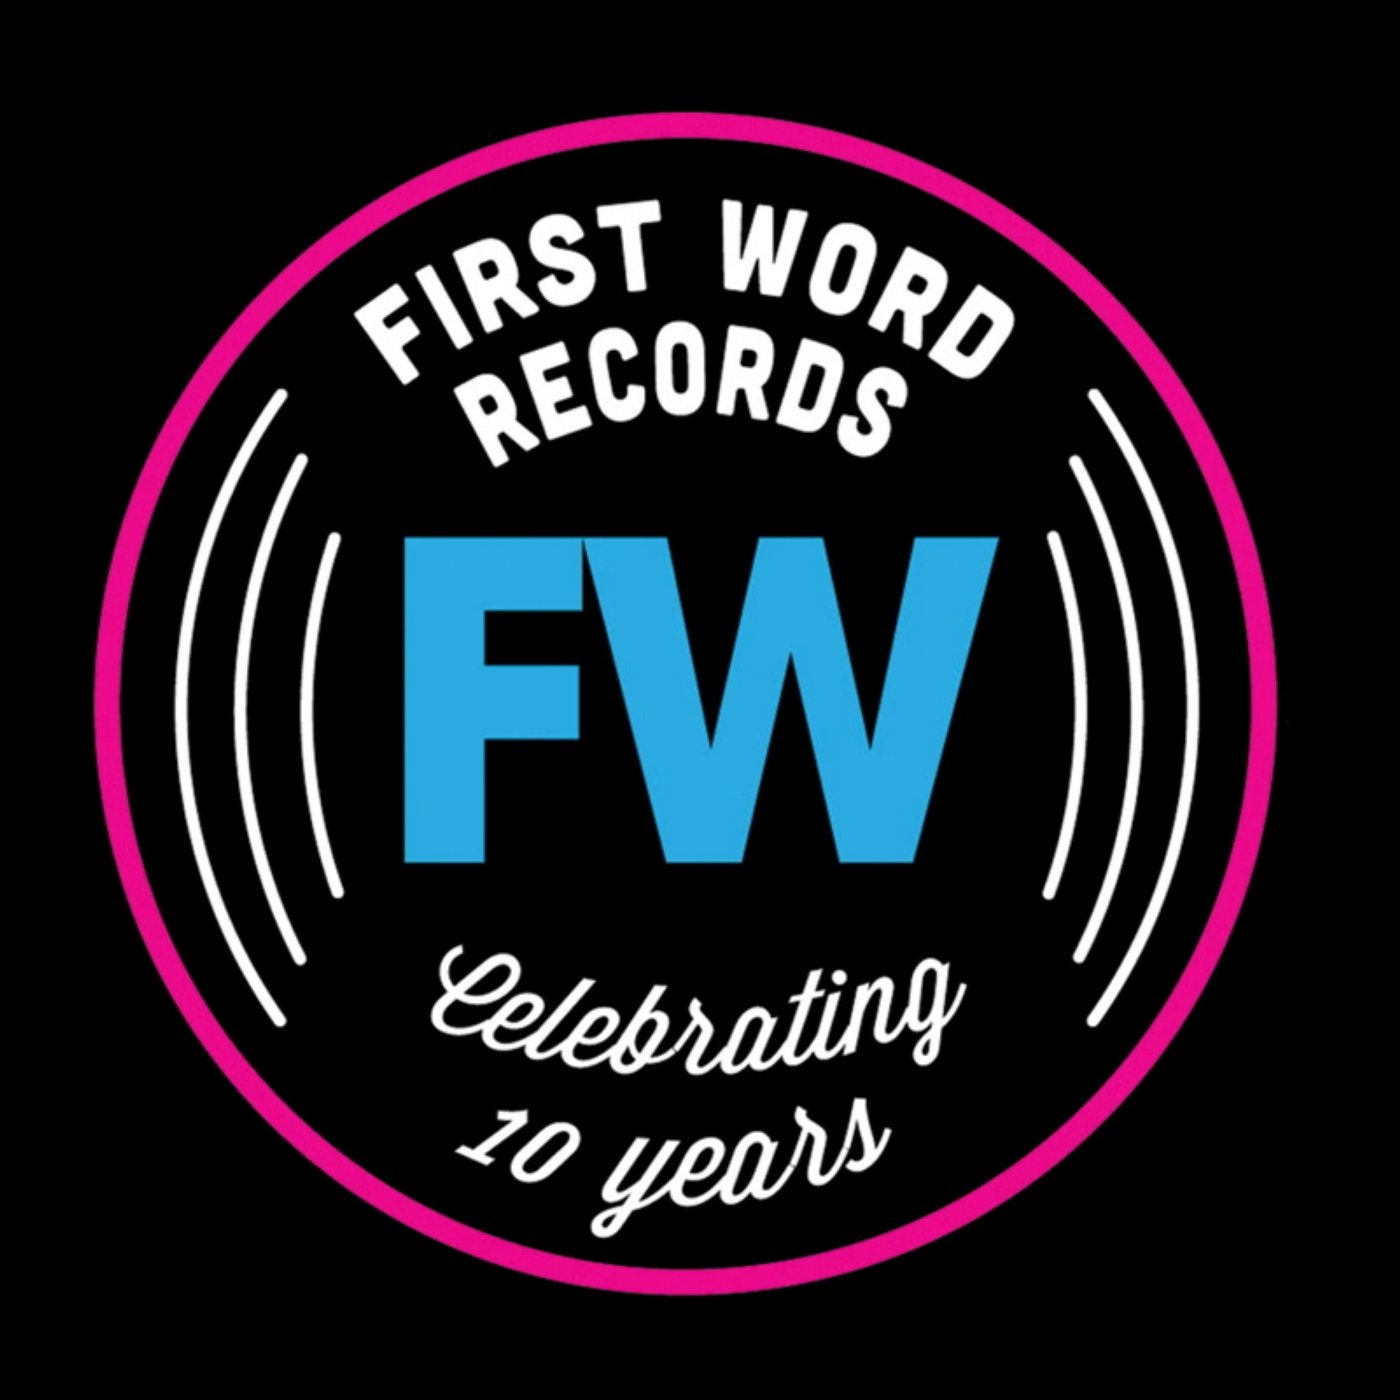 FW is 10: Celebrating 10 Years of First Word Records